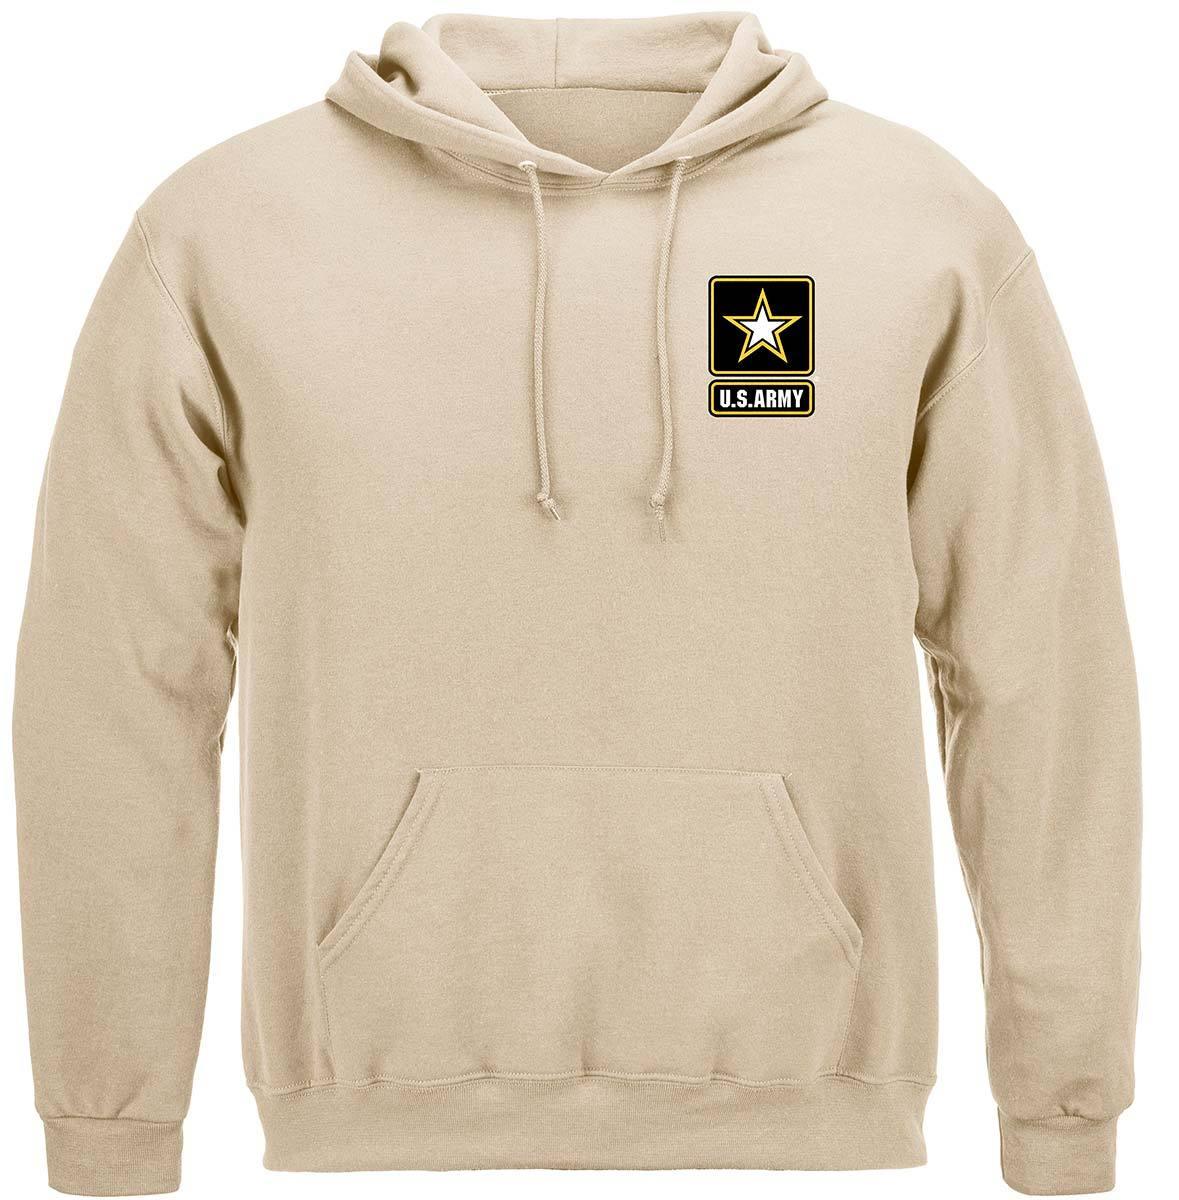 Army Full Battle Rattle Hoodie - Military Republic